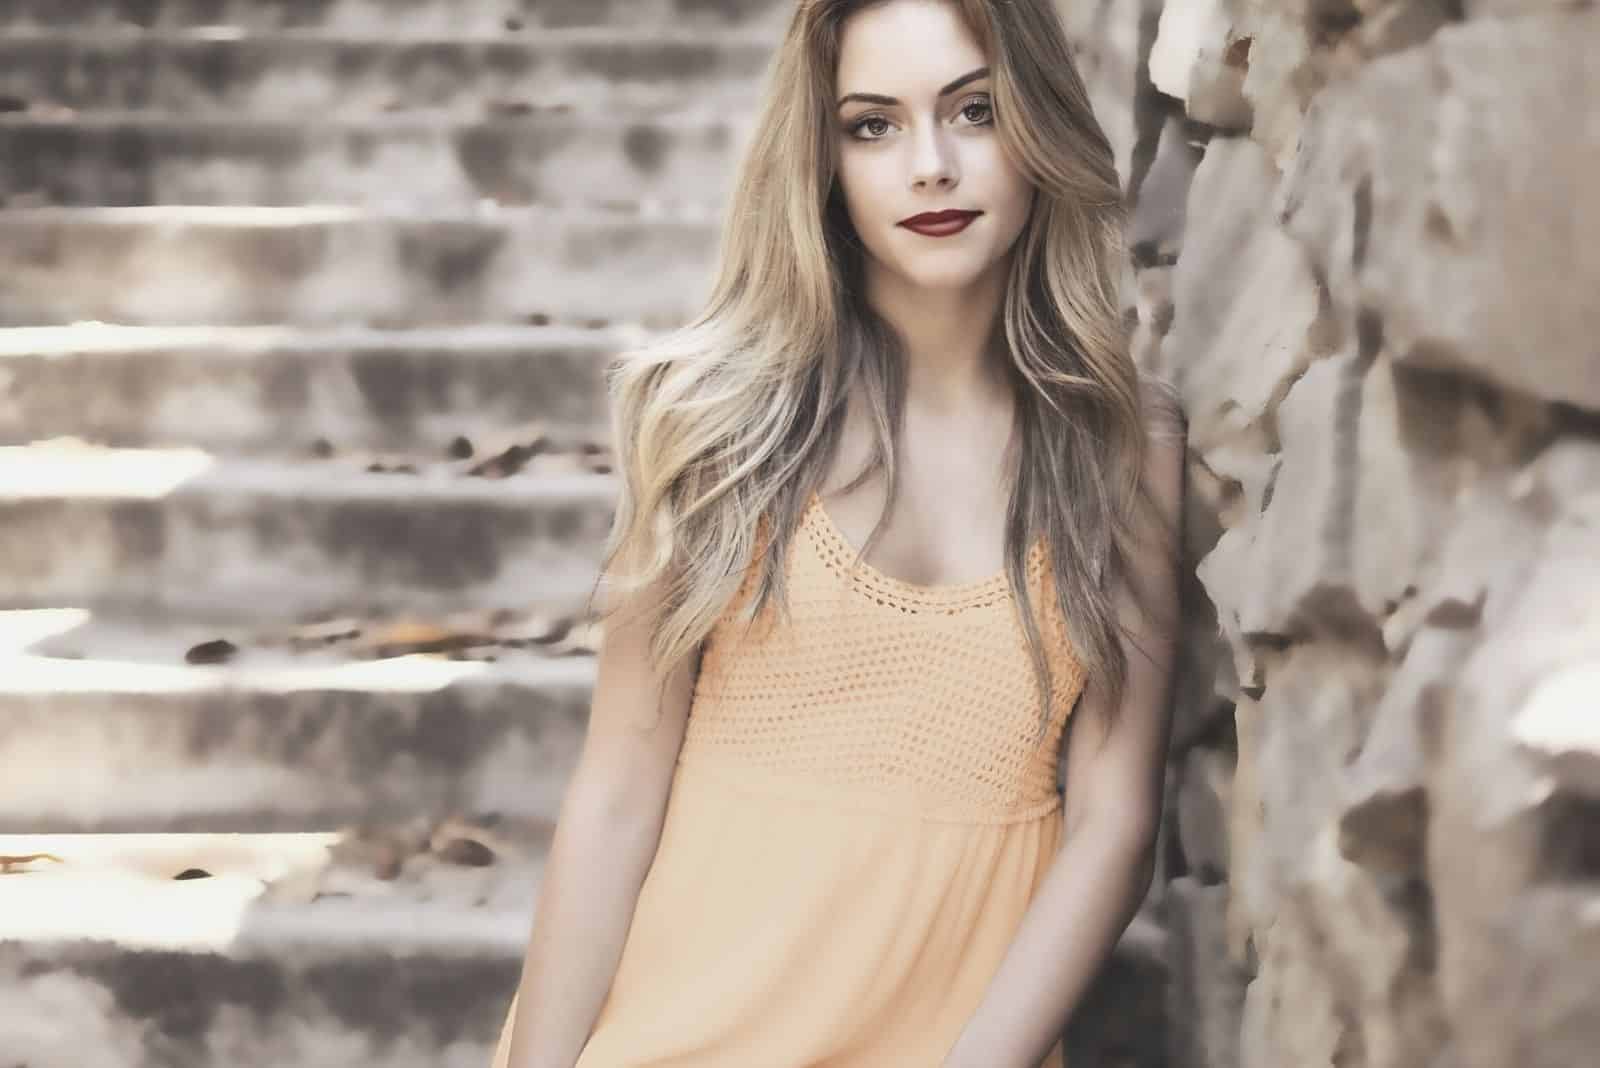 beautiful woman leaning on the rock wall by the stairs standing